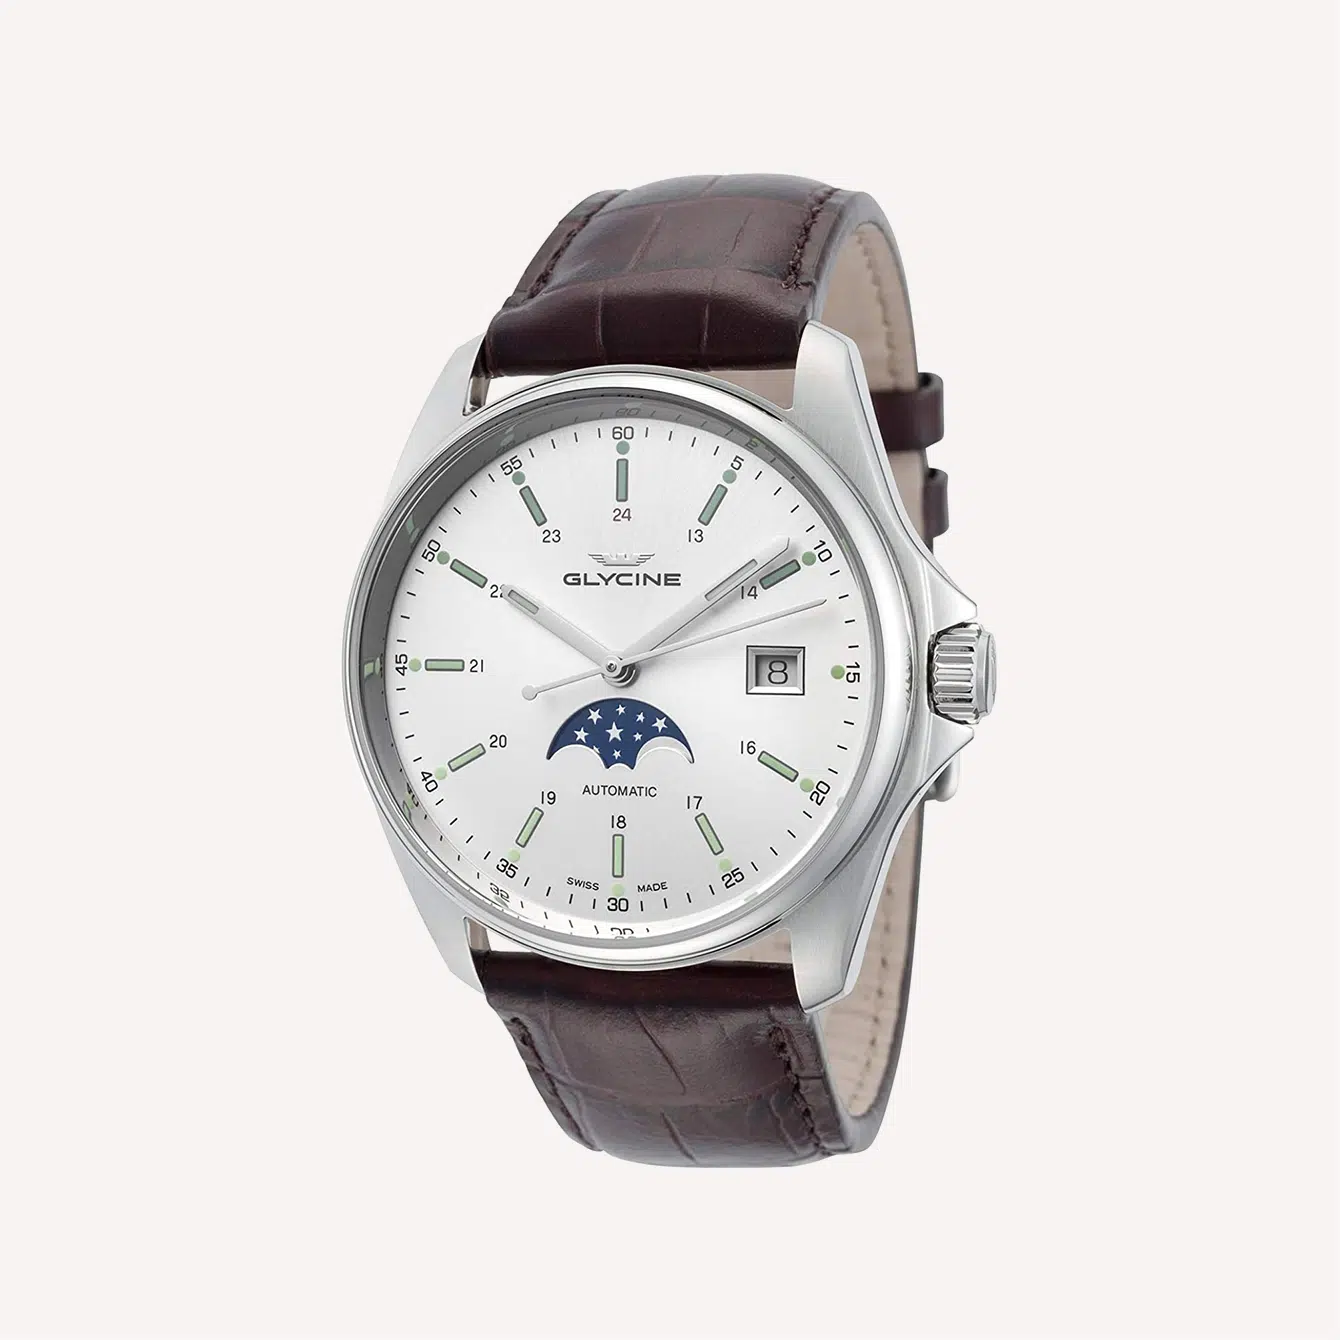 Glycine Combat 6 Classic Moonphase Automatic Watch